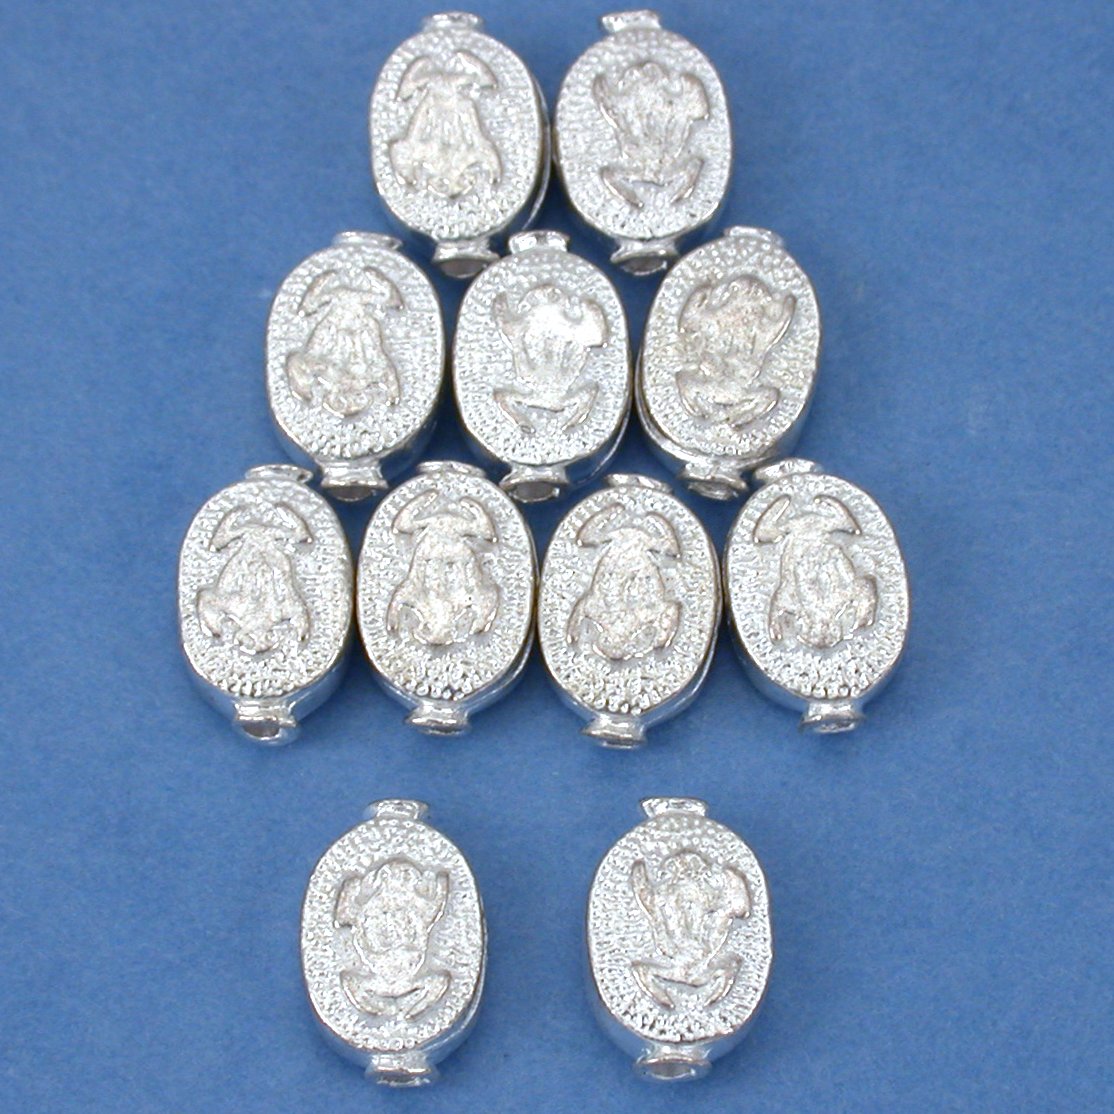 Fluted Oval Frog Silver Plated Beads 11mm 15 Grams 10Pcs Approx.